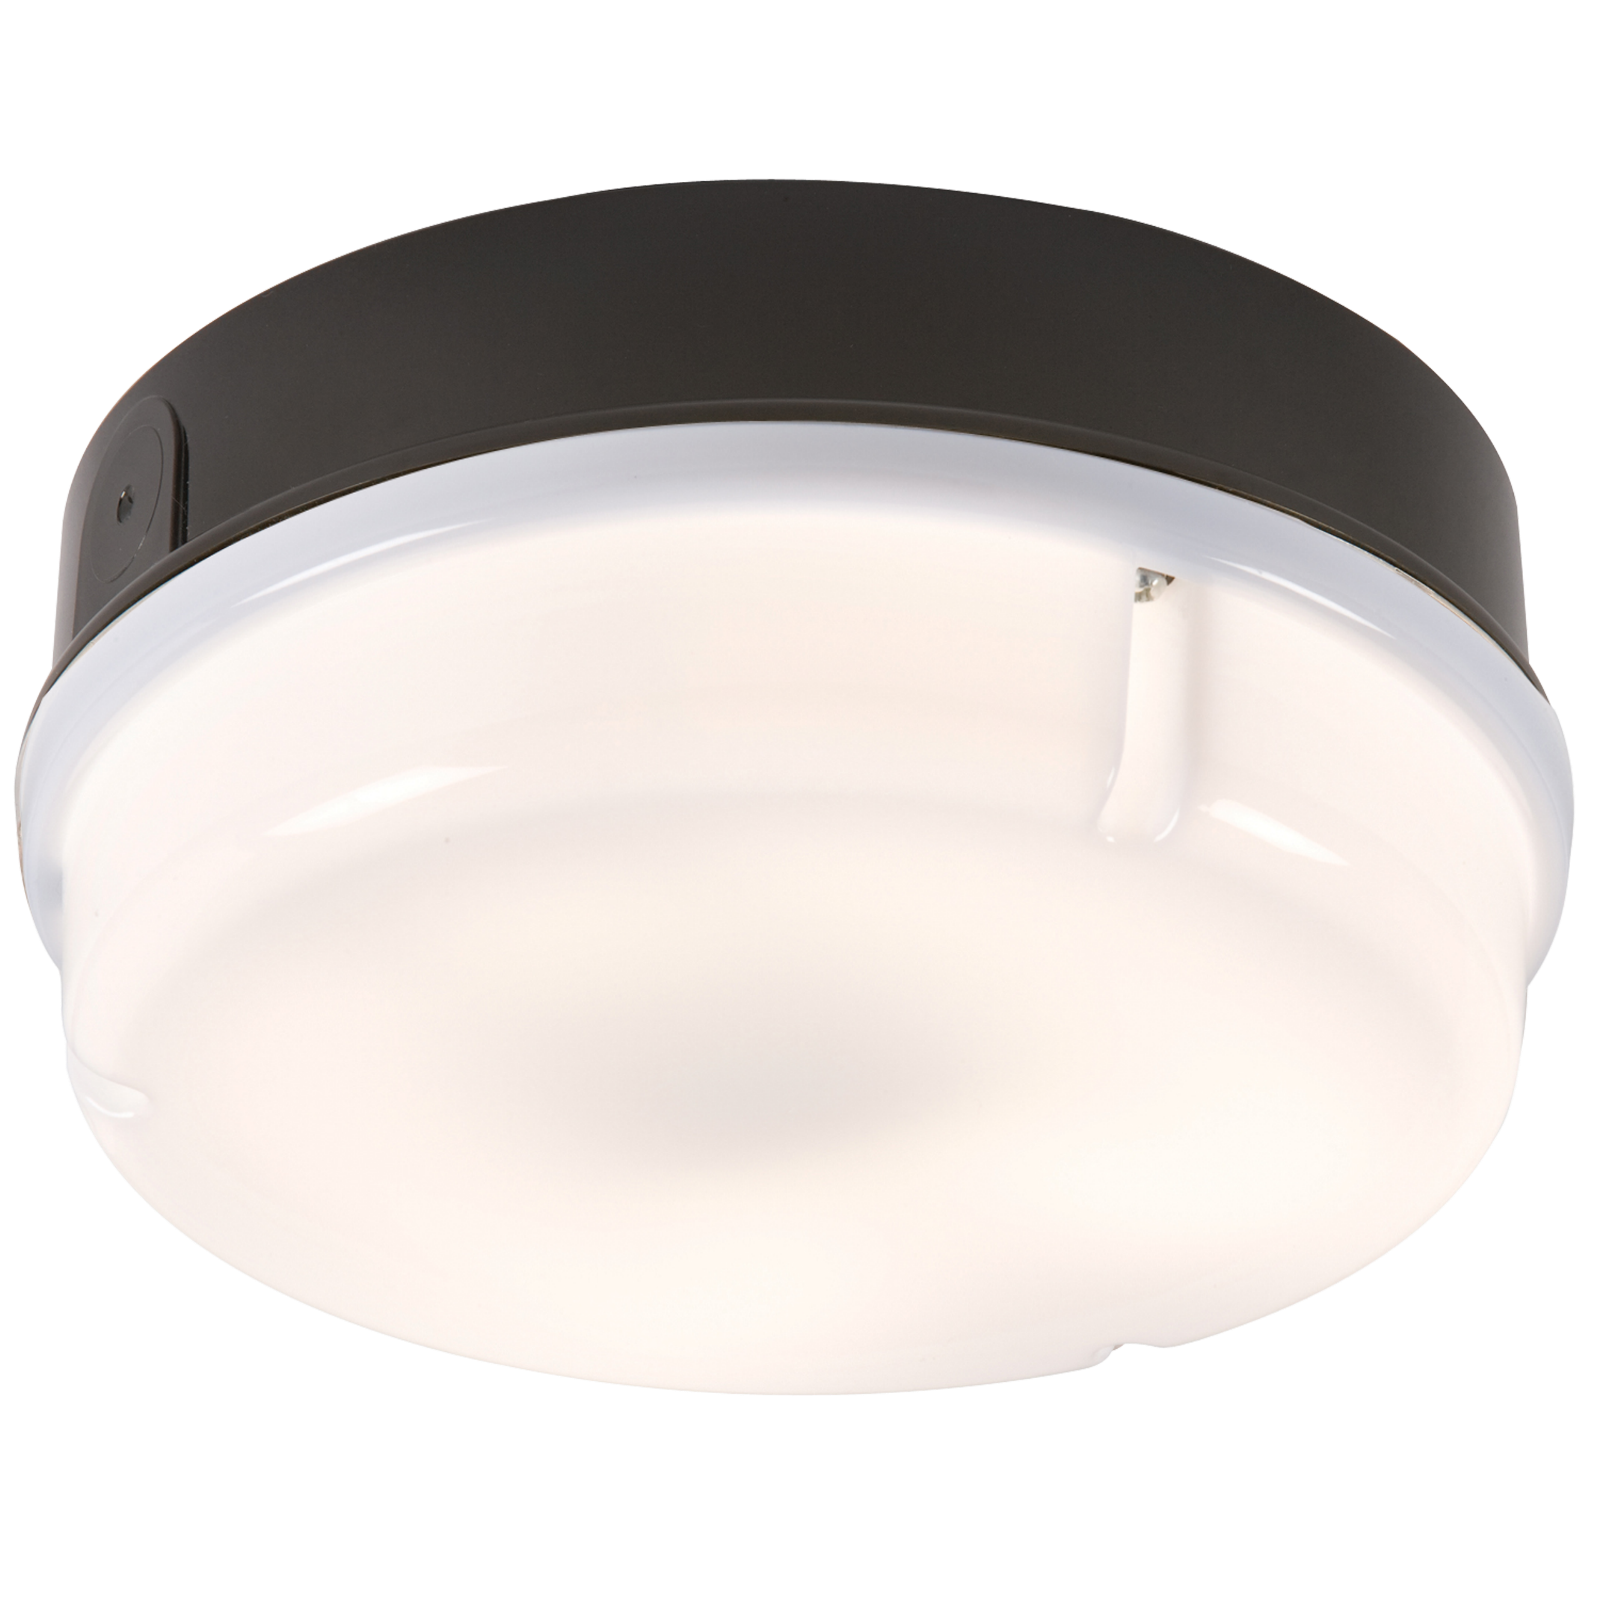 IP65 28W HF Round Bulkhead With Opal Diffuser And Black Base - TPR28BOHF 